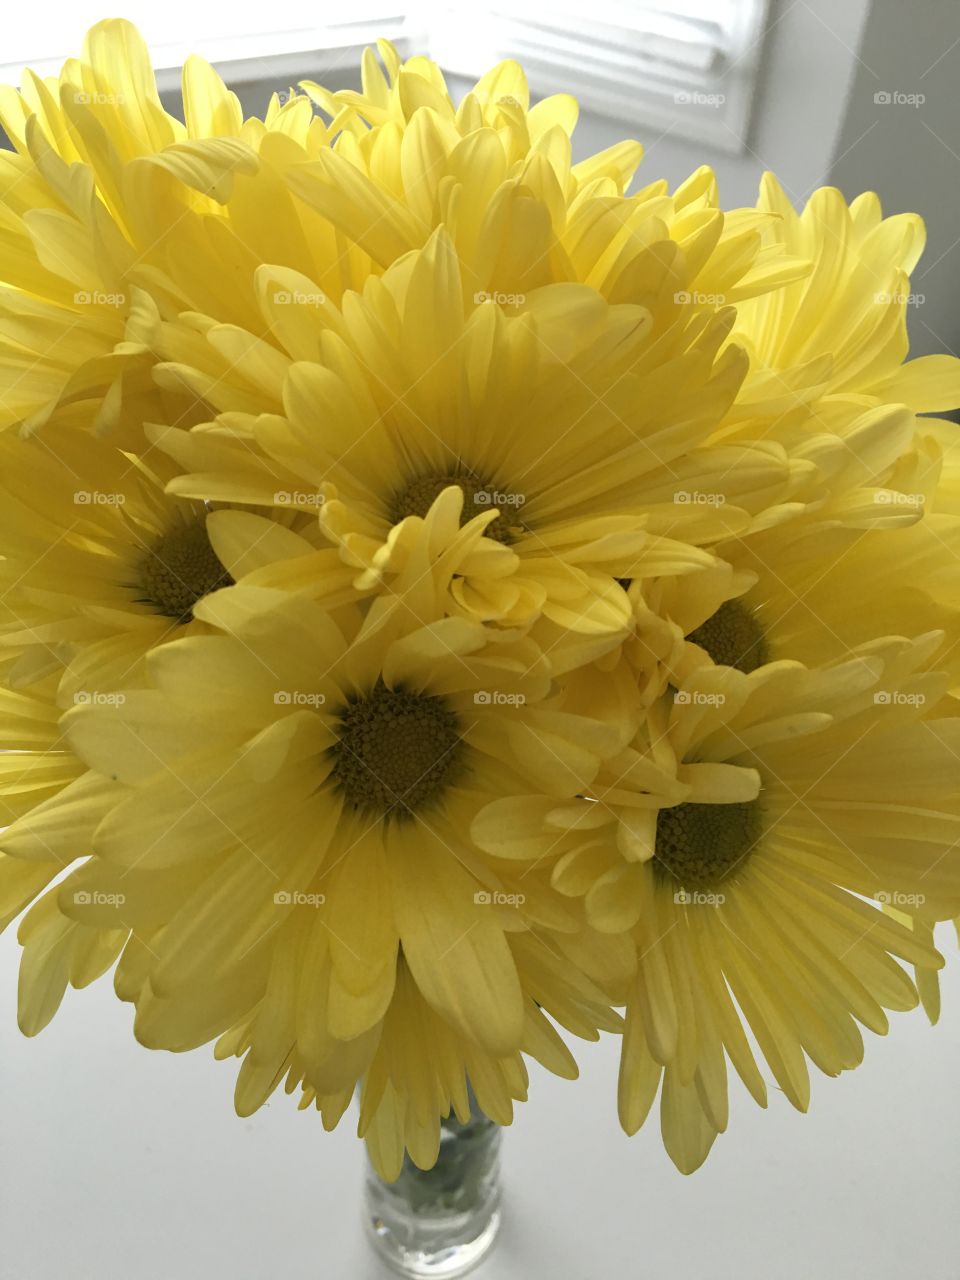 Yellow Daisies in a Vase